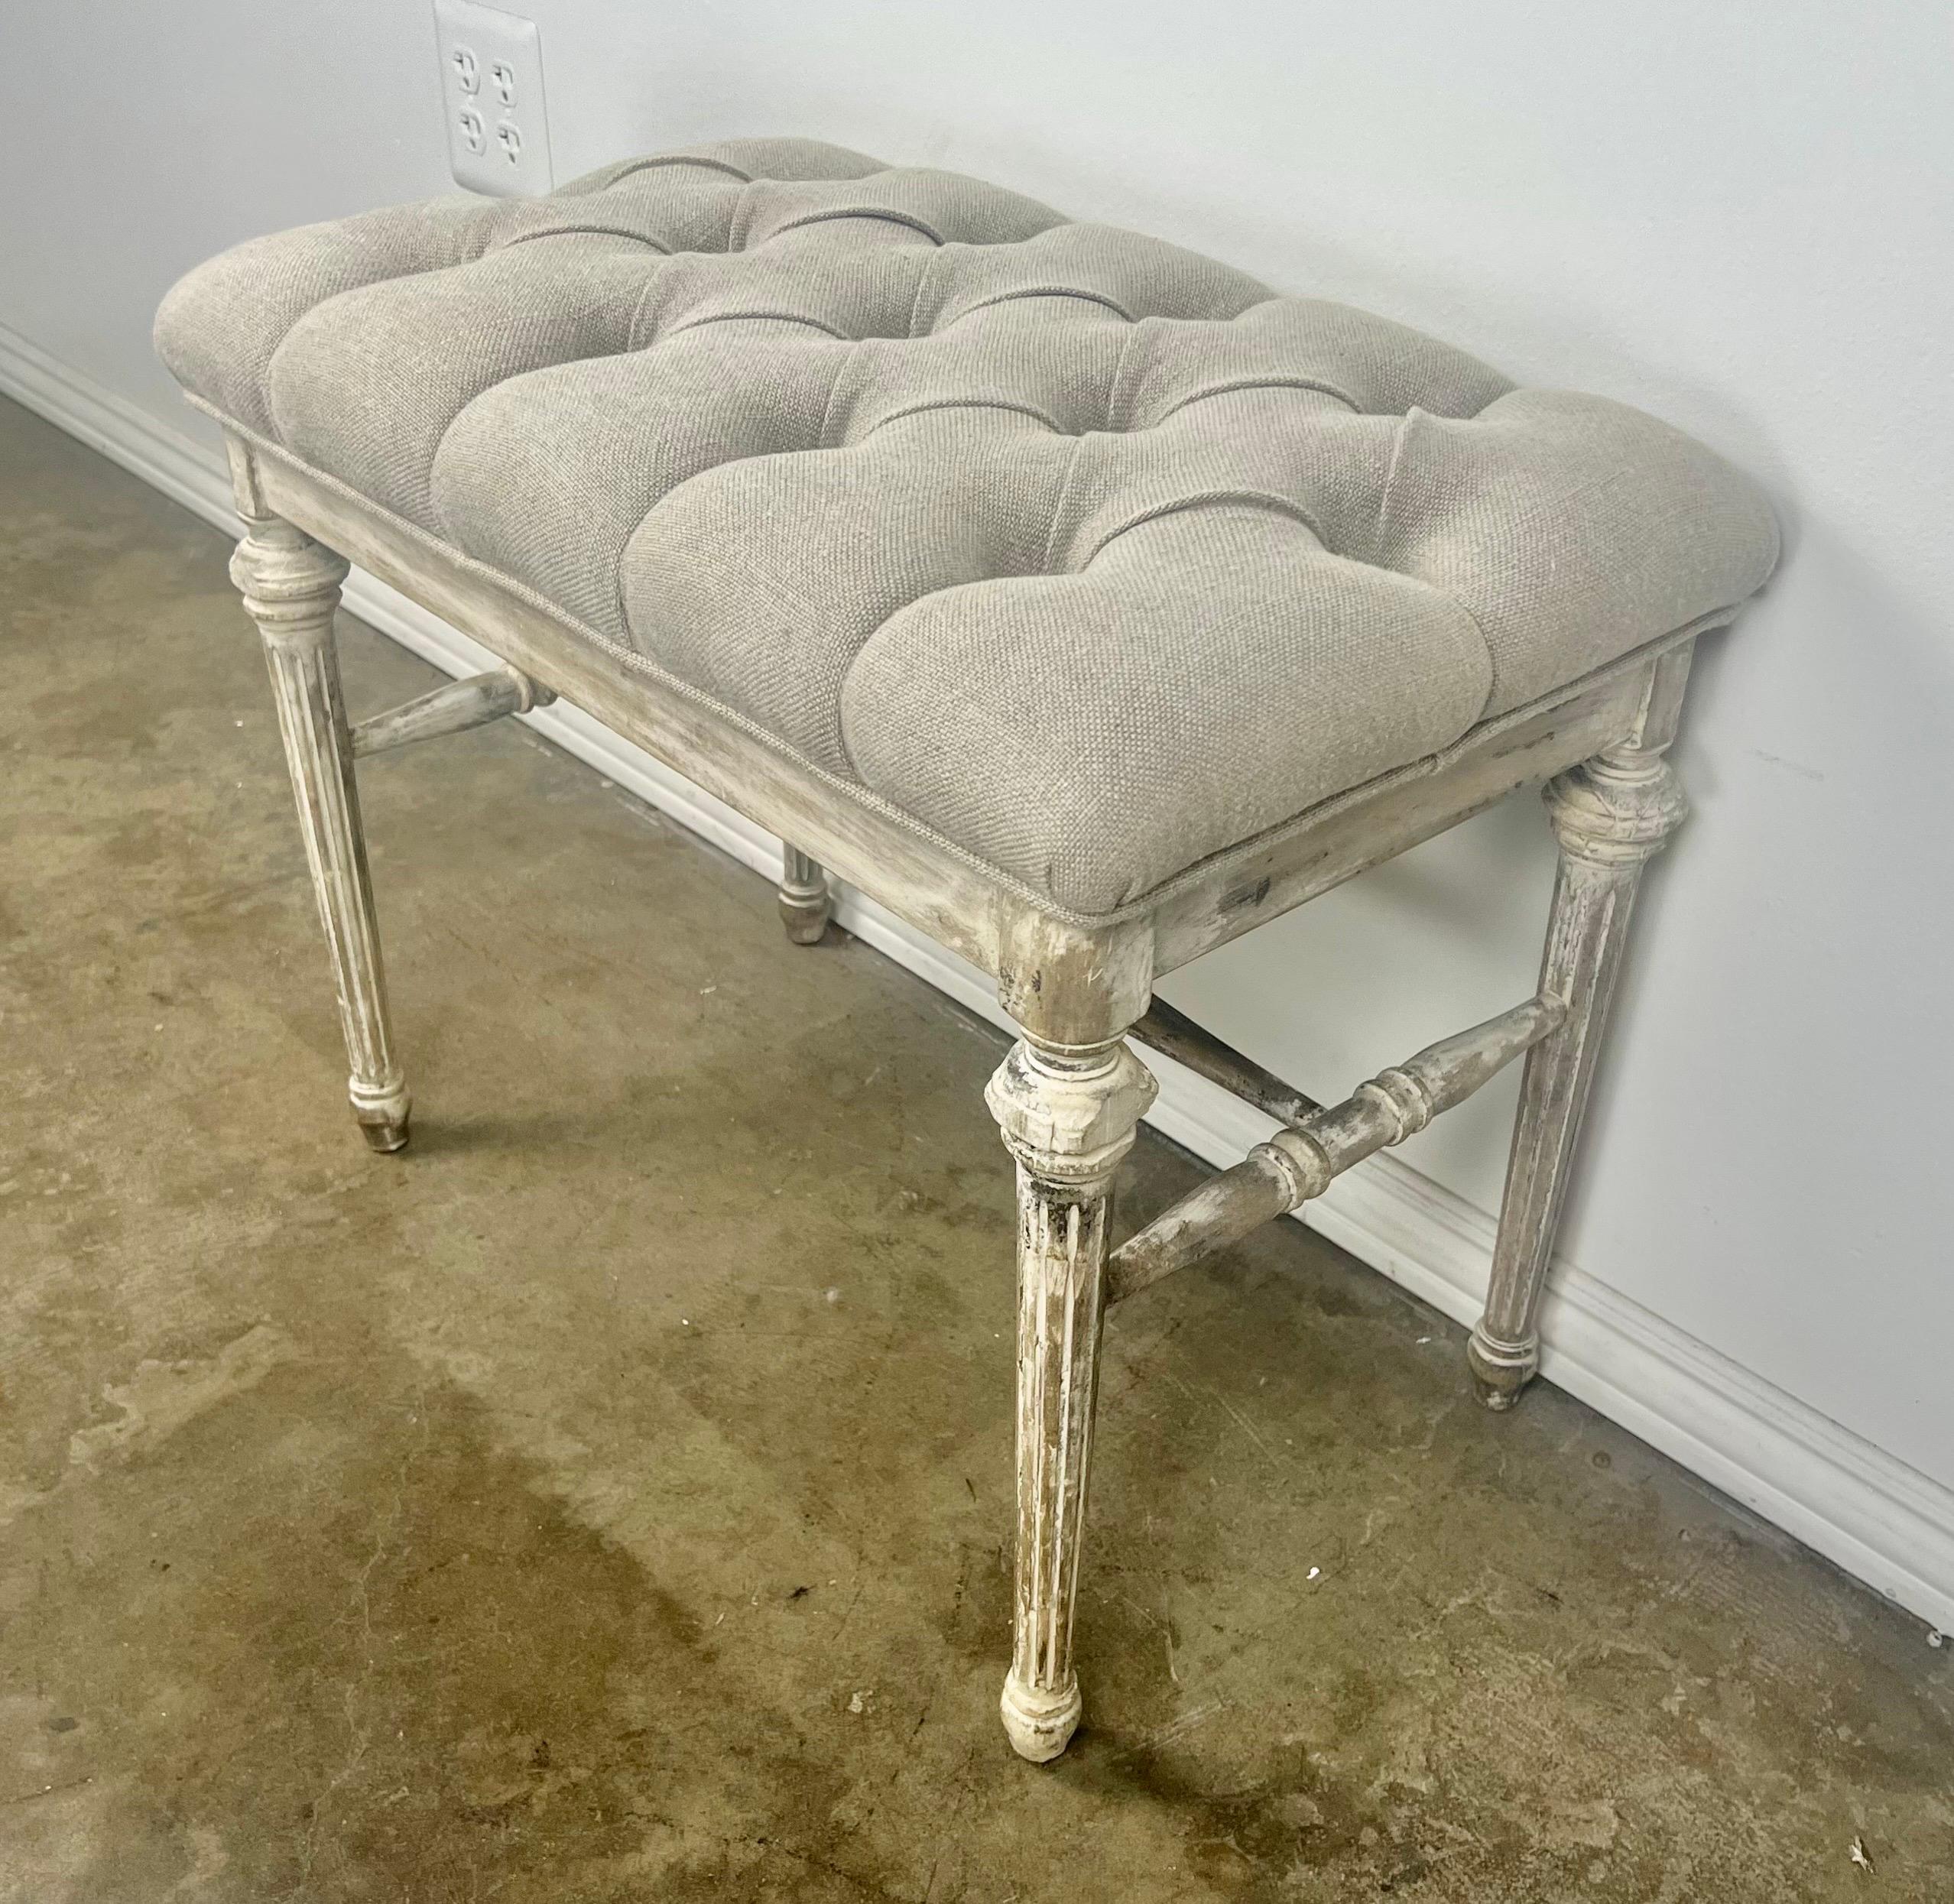 Charming French Louis XVI painted bench.  The bench stands on four straight fluted legs.  The paint is worn and only remnants remain.  Newly reupholstered in Belgium linen with nailhead trim detail.